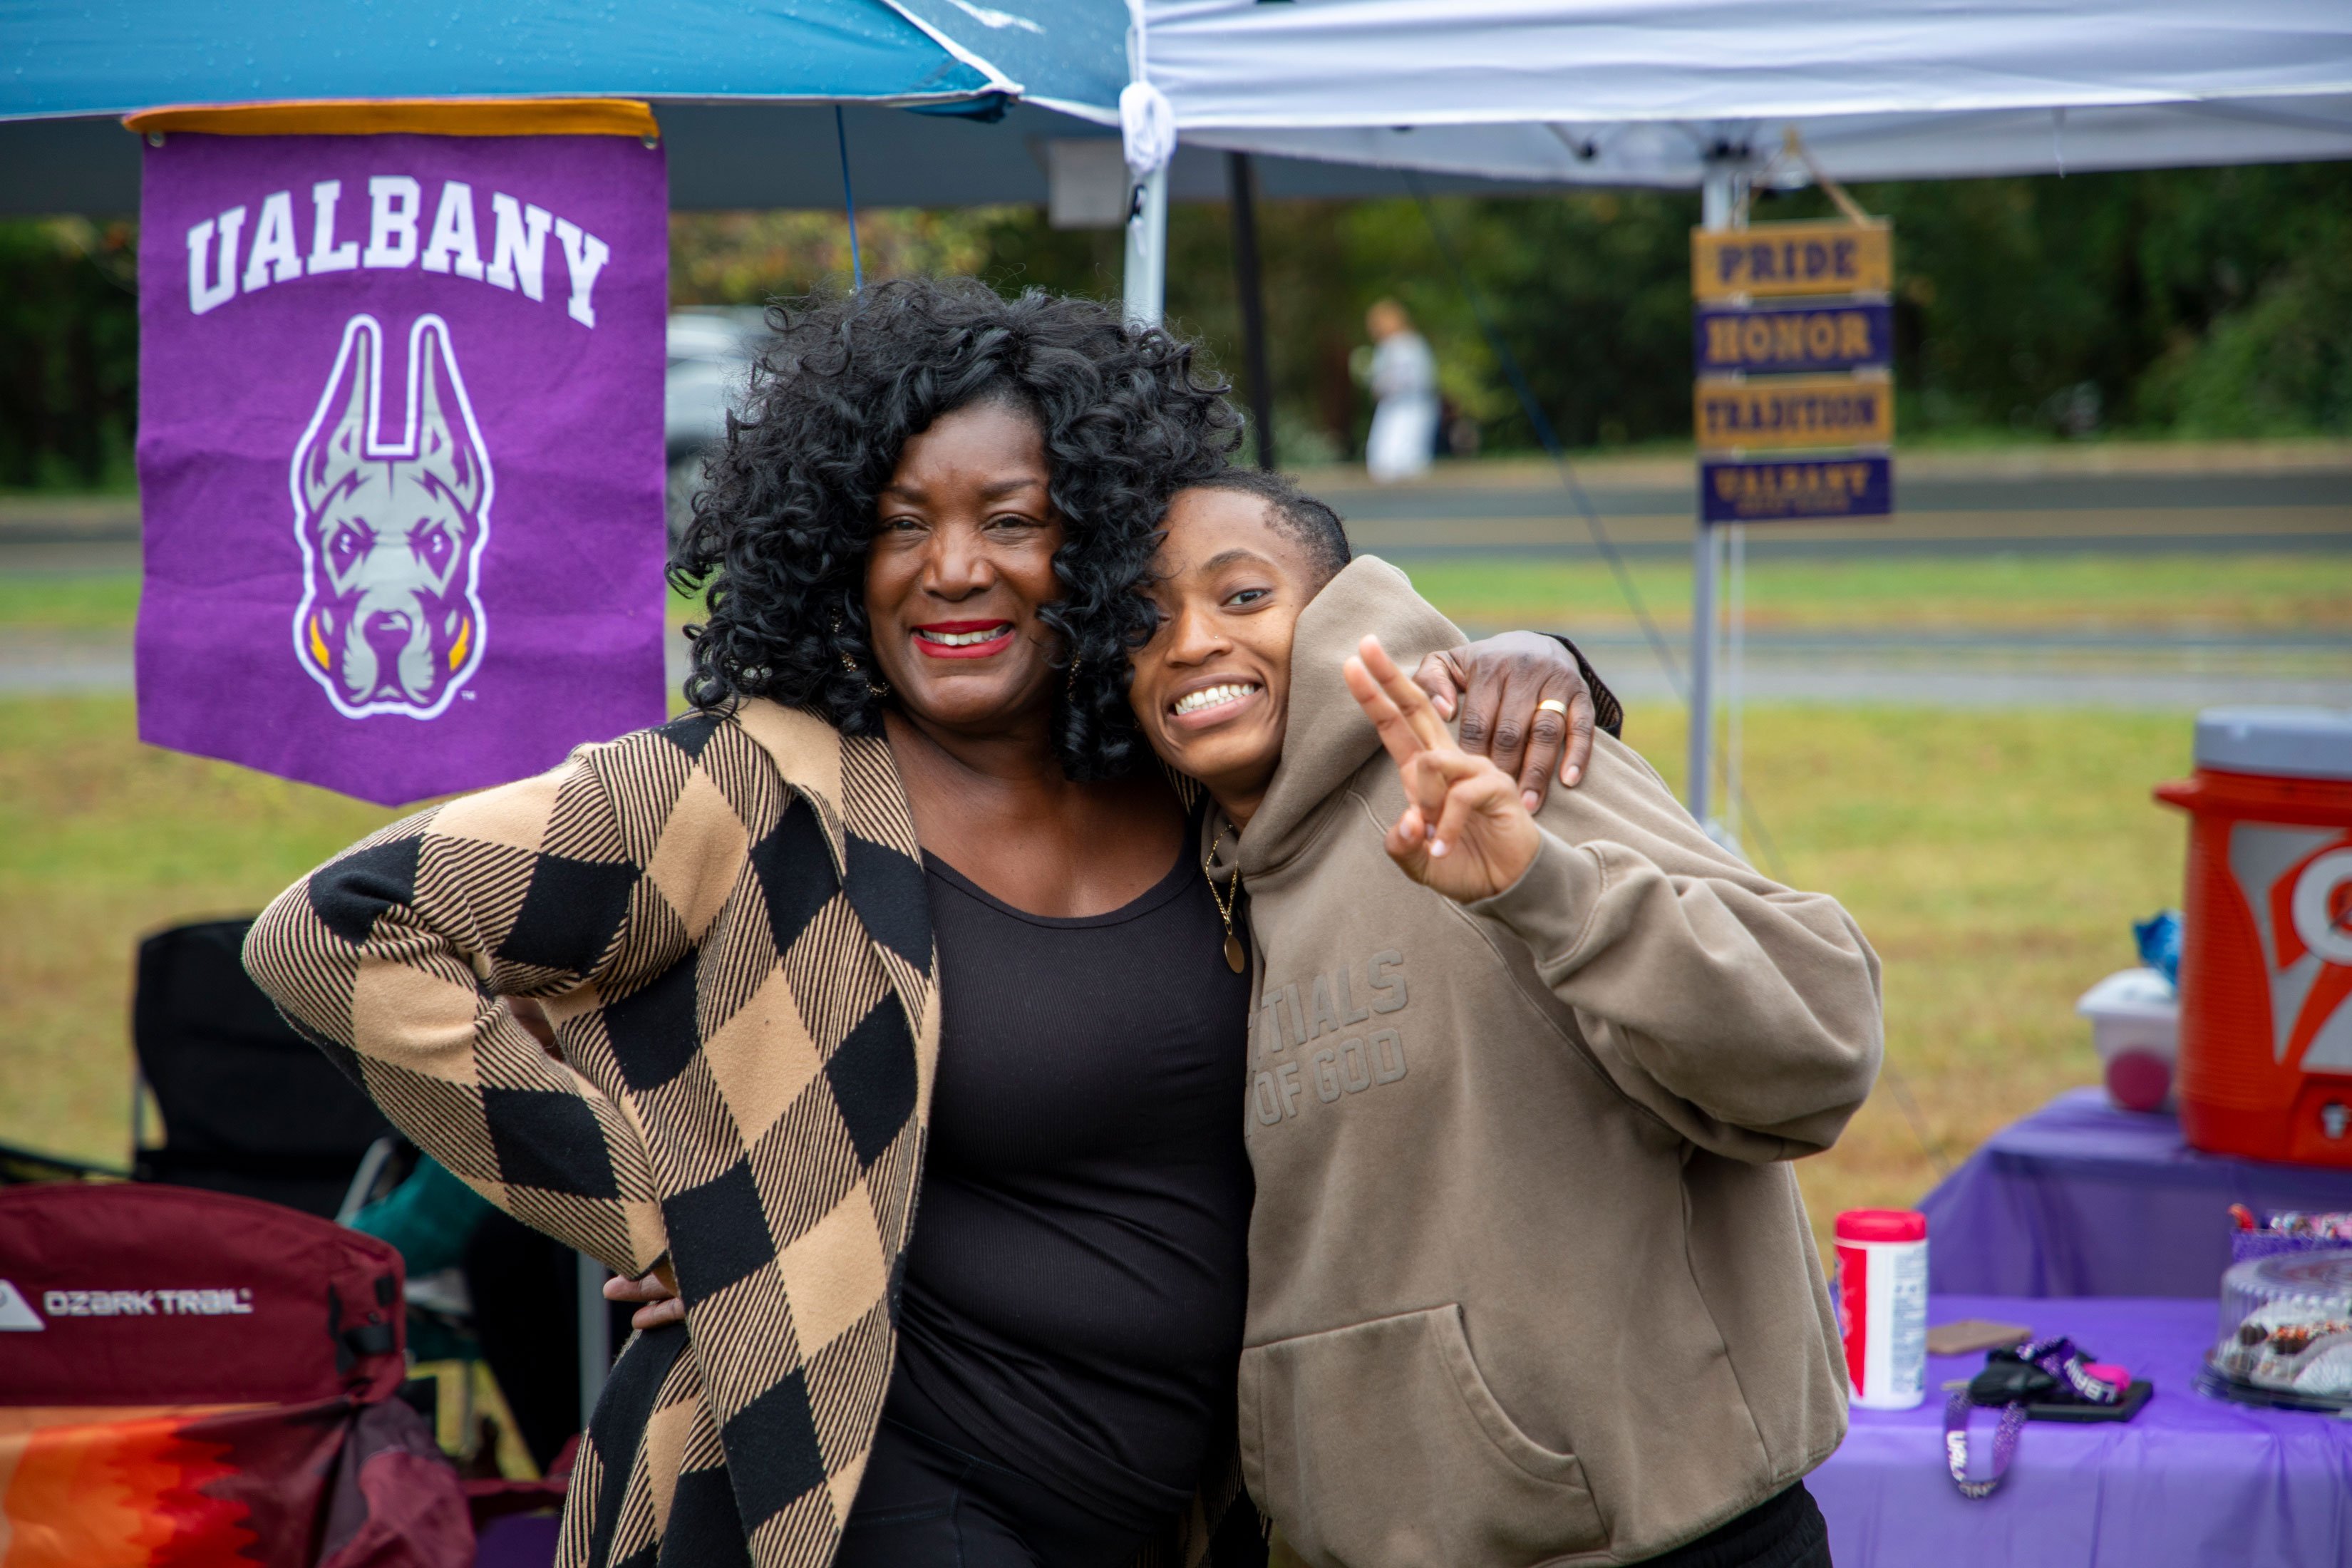 Two adults smile as they pose for a photo in front of a UAlbany sign.